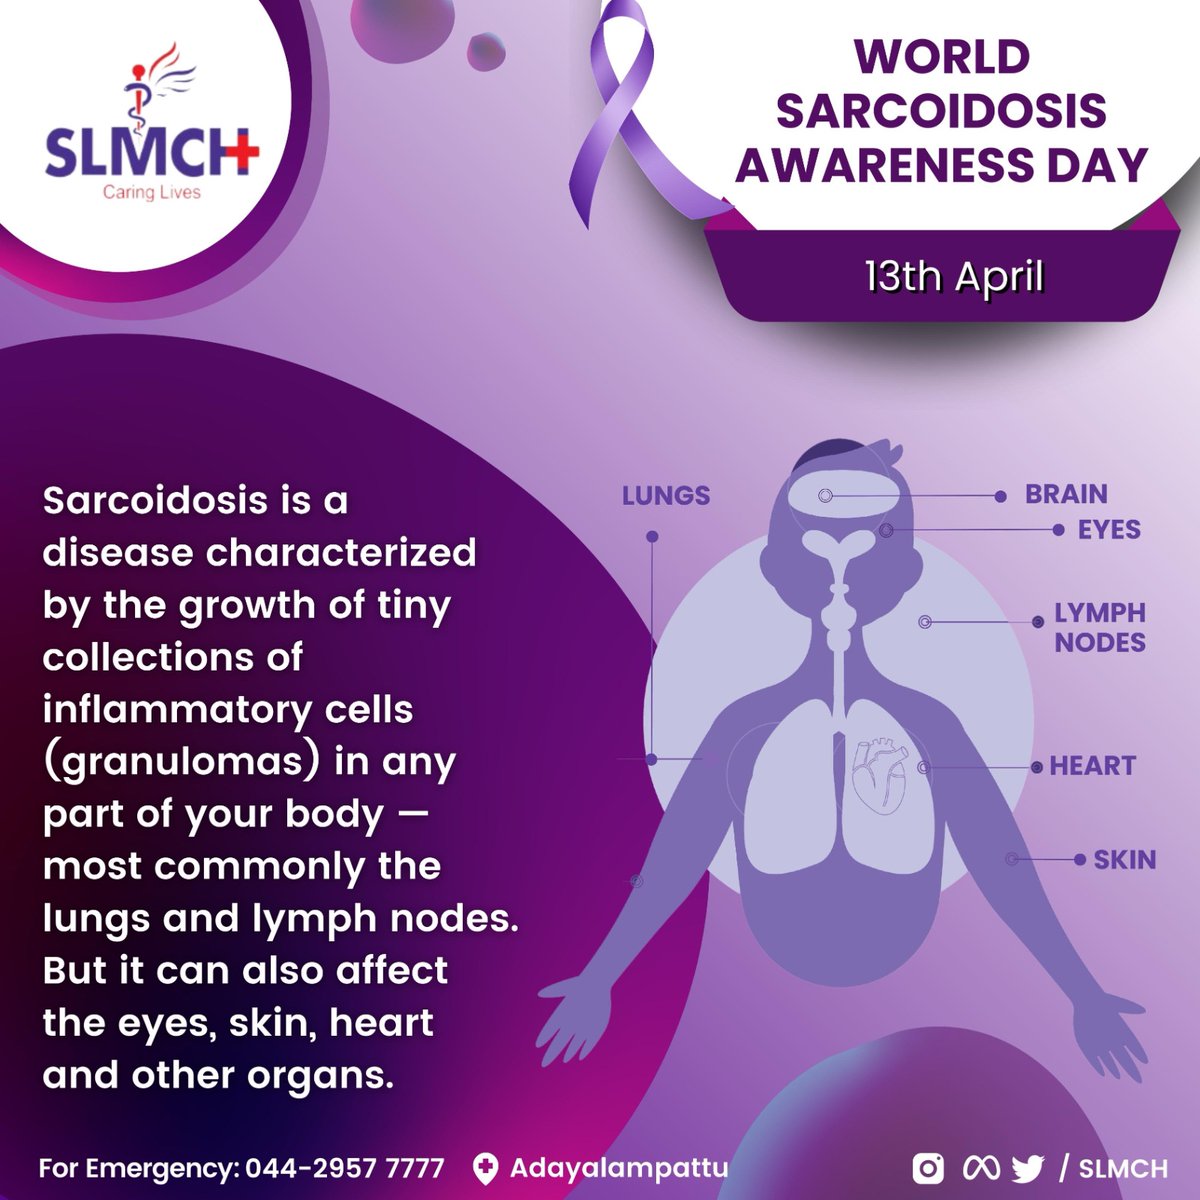 World Sarcoidosis Awareness Day

Check our blogs for more details: blog.slmch.ac.in/2023/04/13/wor…

#SLMCH #srilalithambigai #Medical #chennai #sarcoidosis #sarcoidosisawareness #lungs #lymphnodes #eyes #skin #asthma #immune #system #cells #breathingissues #healthylife #medical #consult